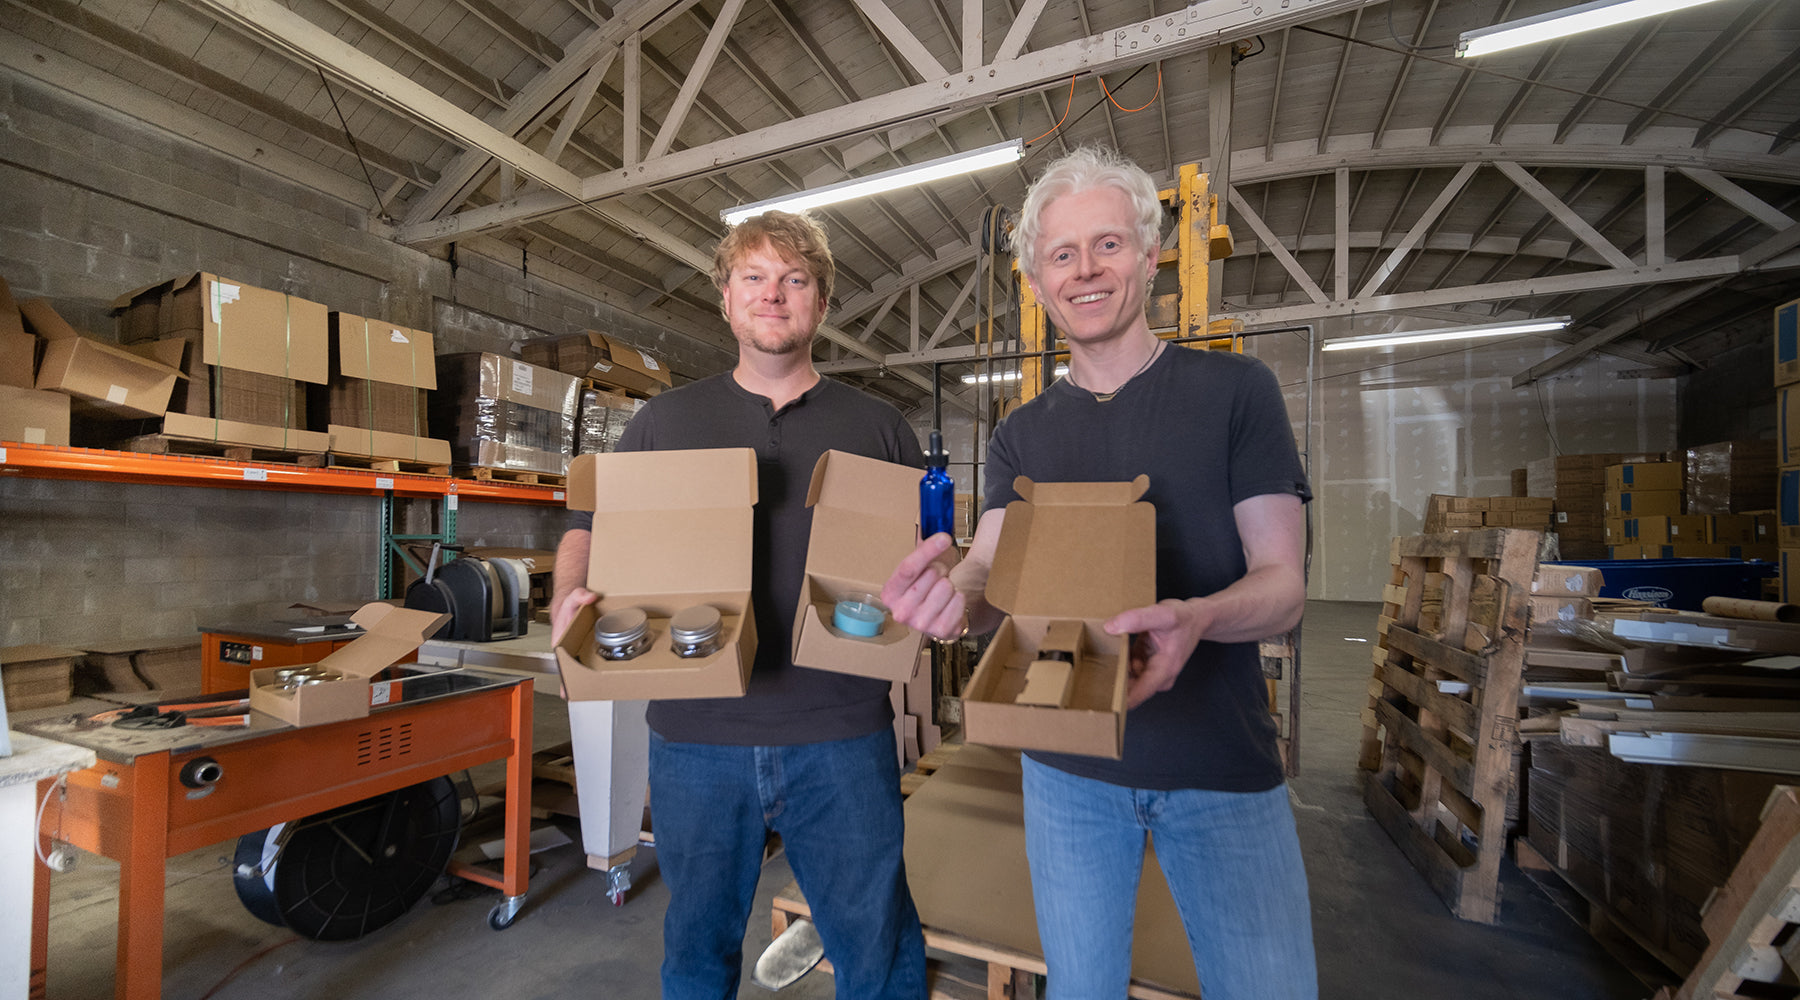 How two San Luis Obispo locals are growing an innovative packaging company in Paso Robles, California